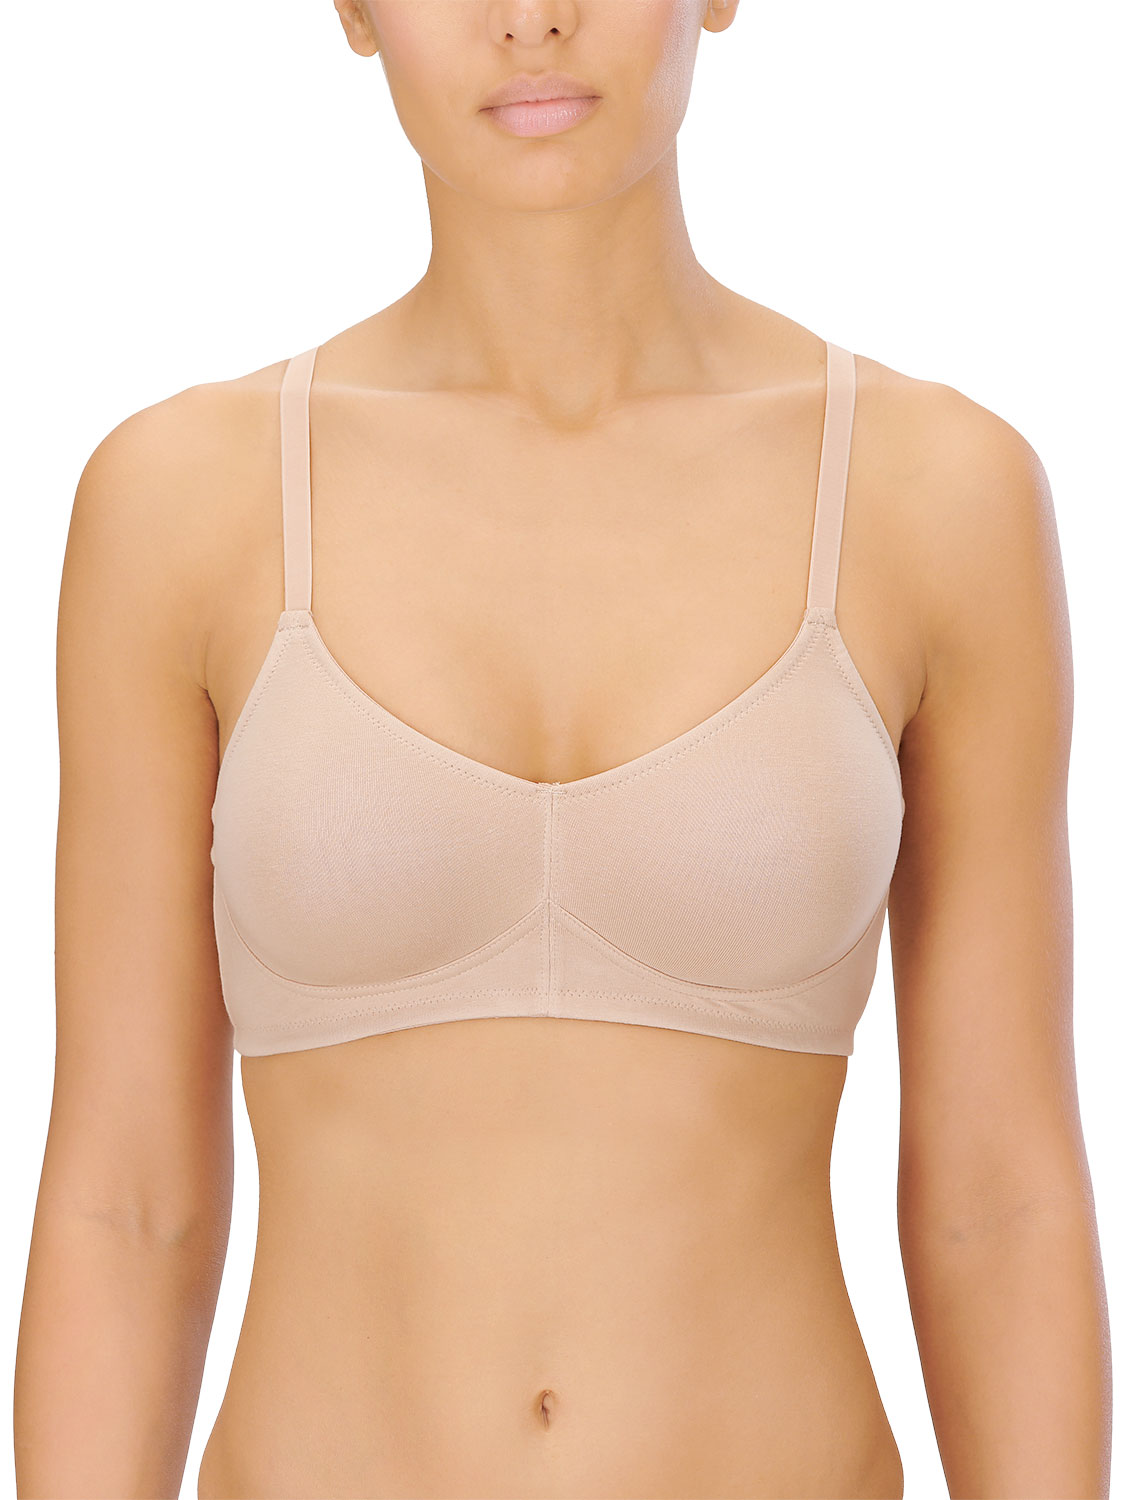 Naturana Soft Full Cup Cotton Lined Non Wired Bra 86666 RRP £17.95 